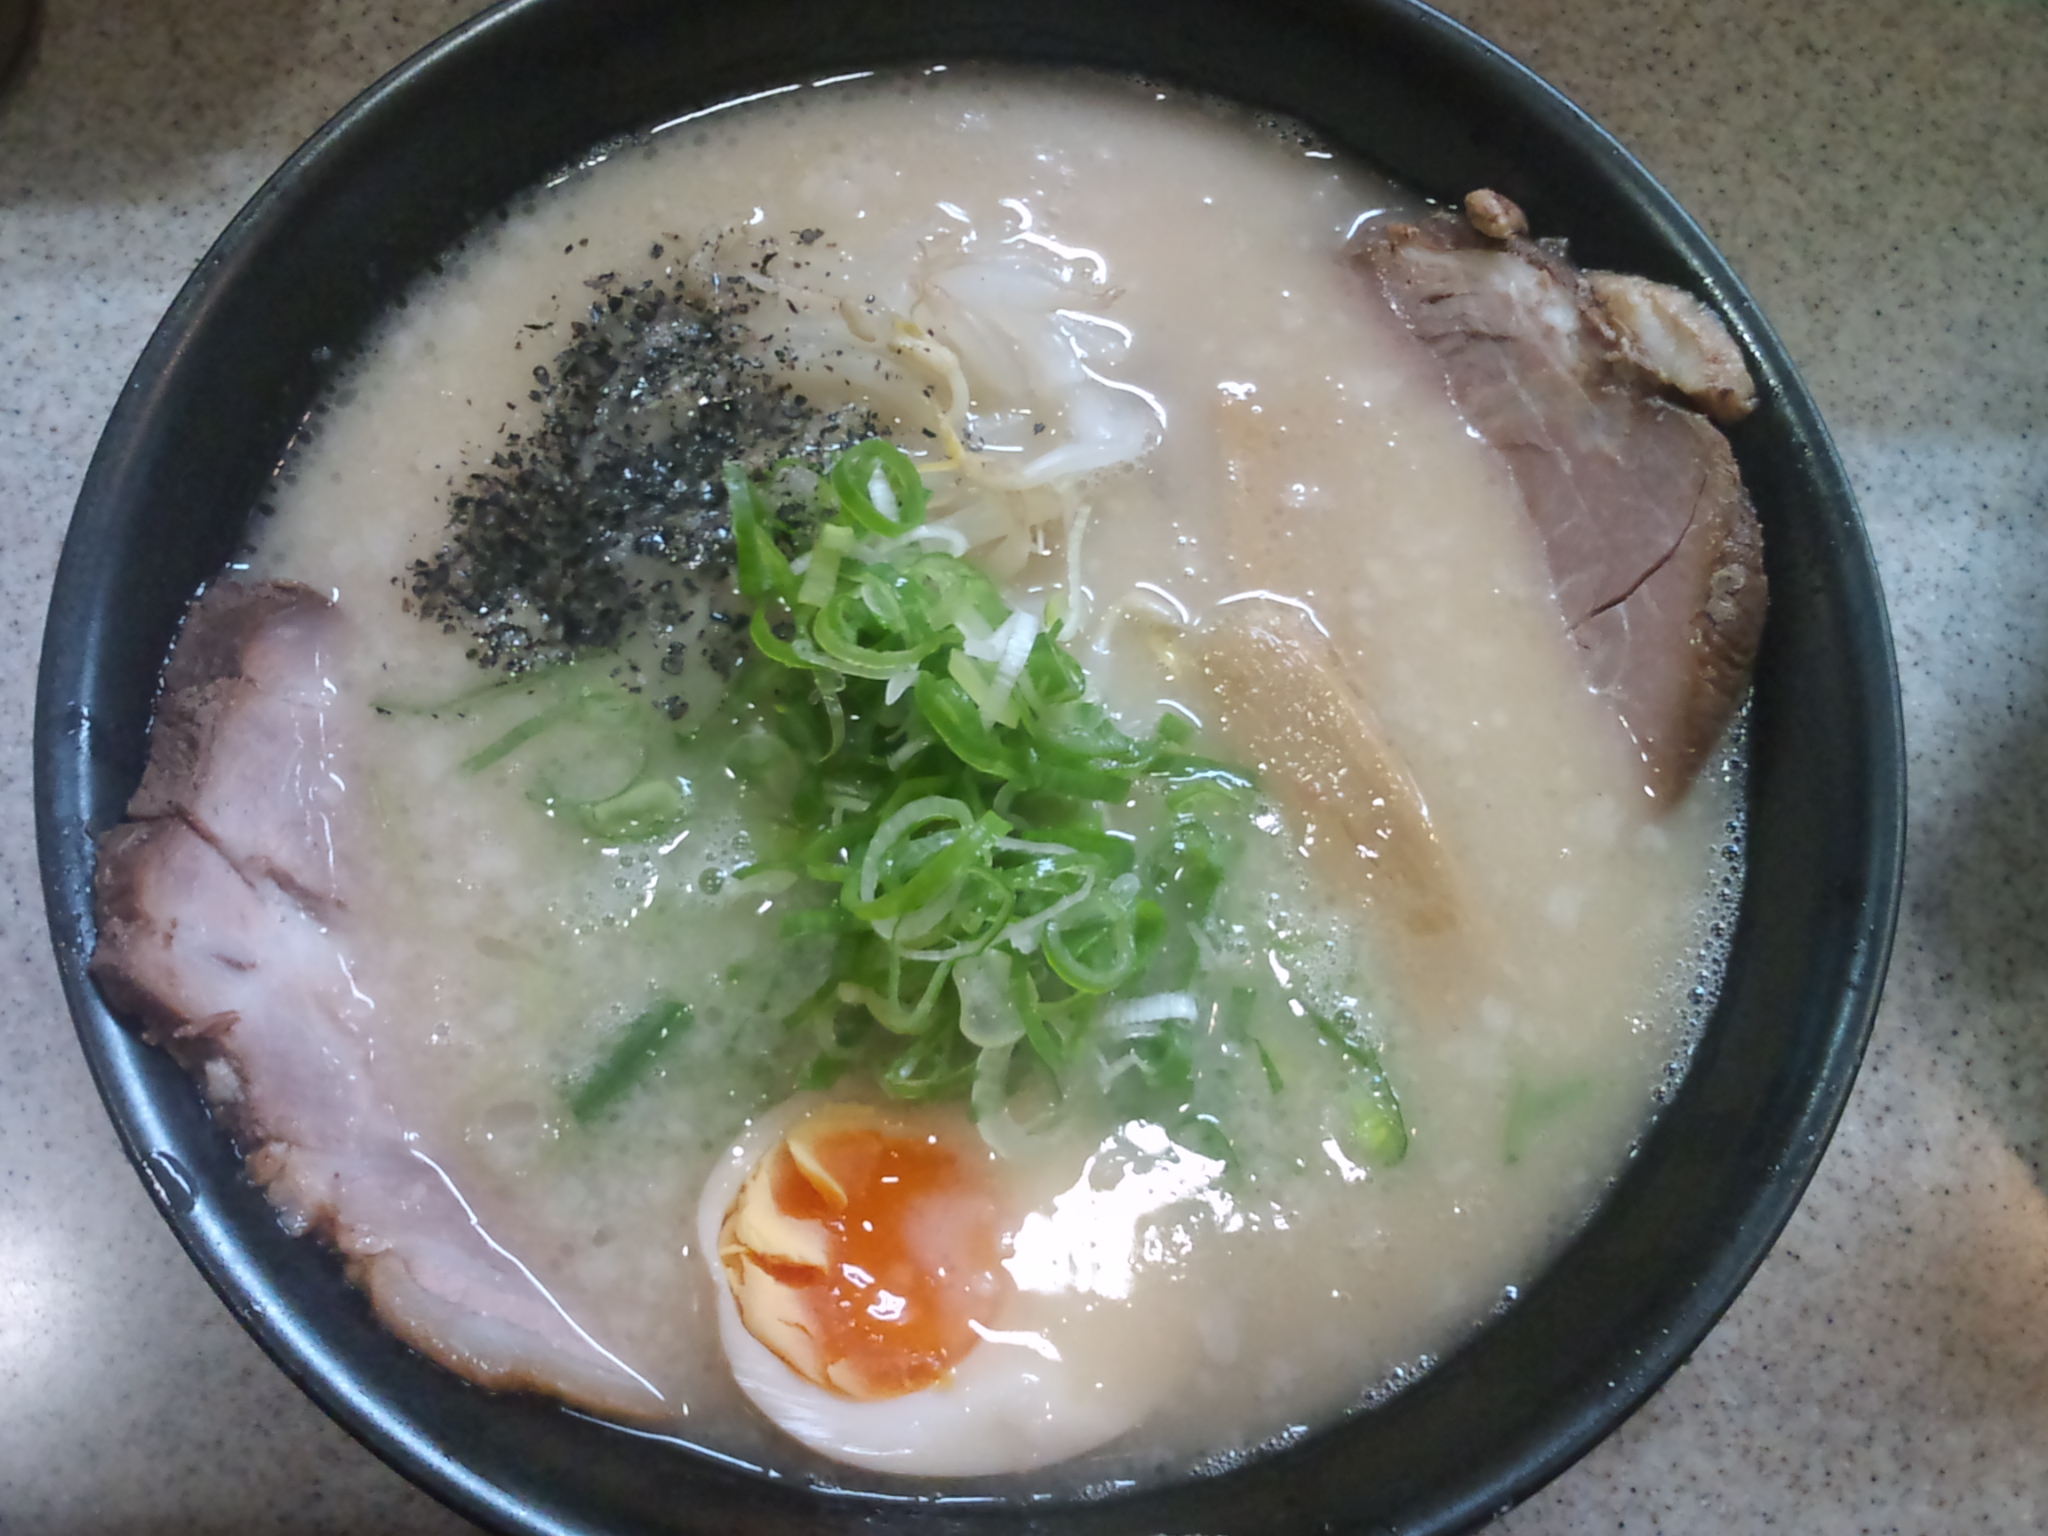 a bowl of ramen with meat, egg and vegetables